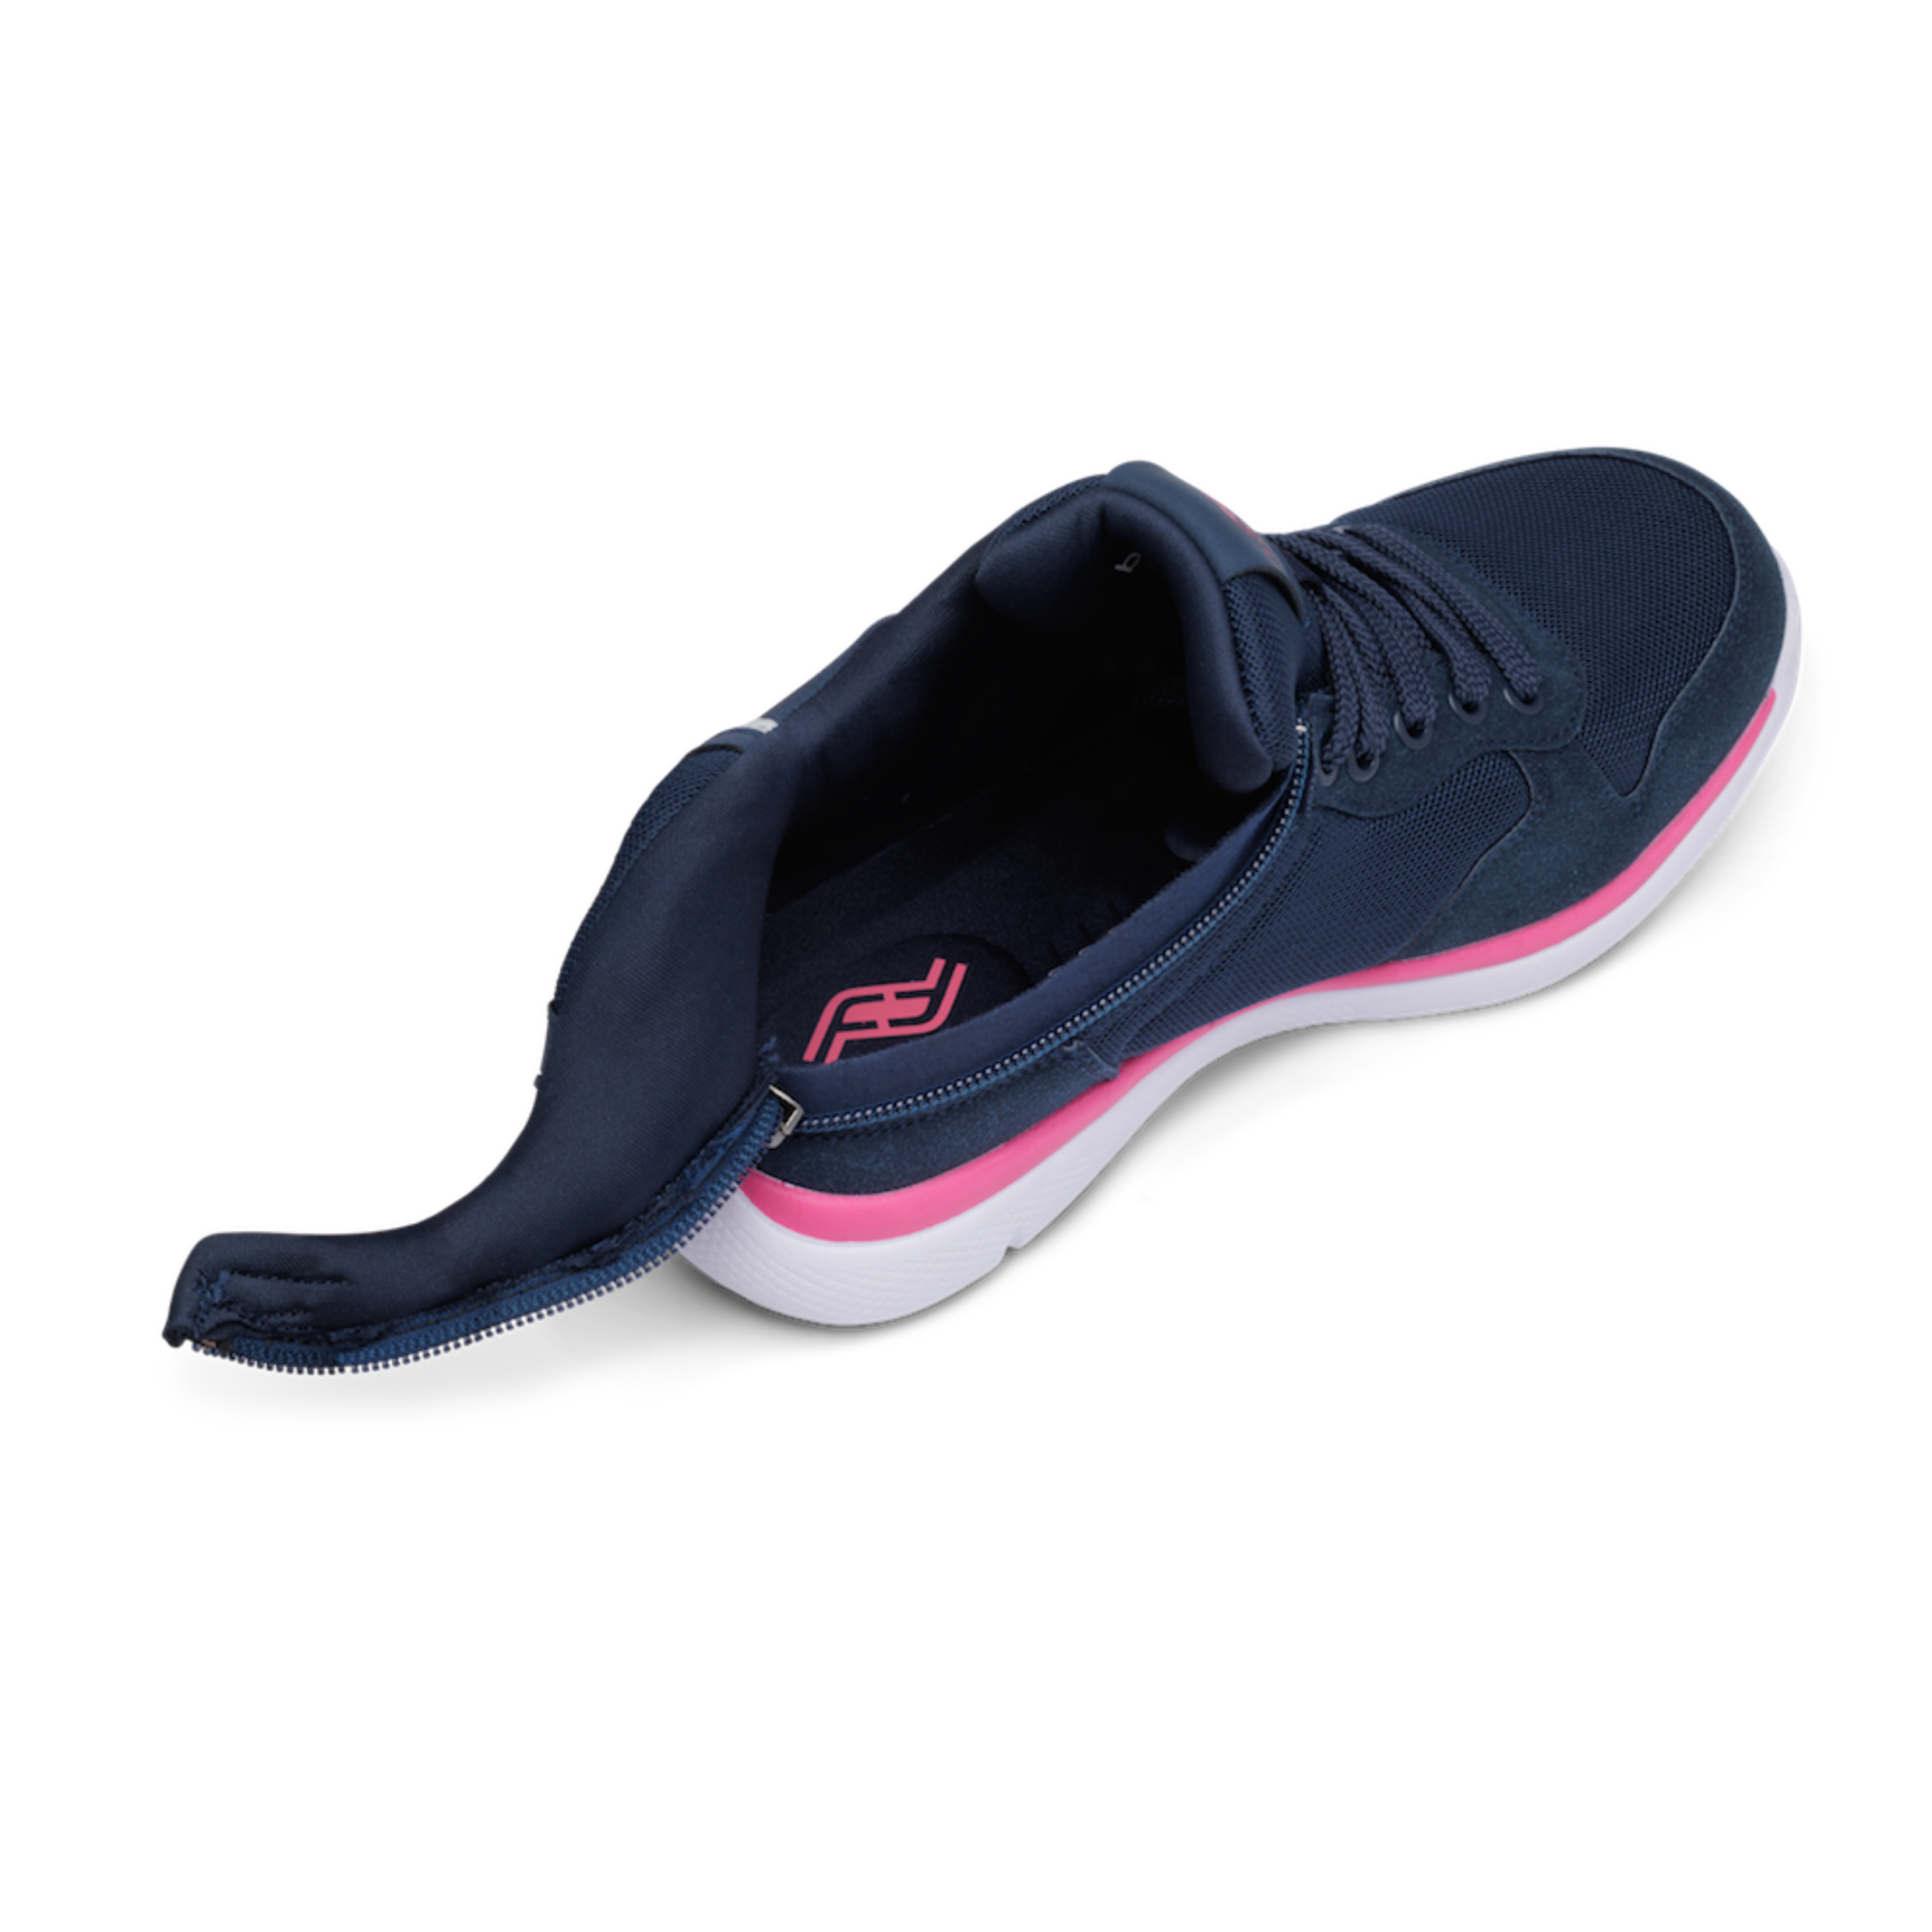 Friendly Shoes Excursion (Women's) - Mid Top Navy / Pink